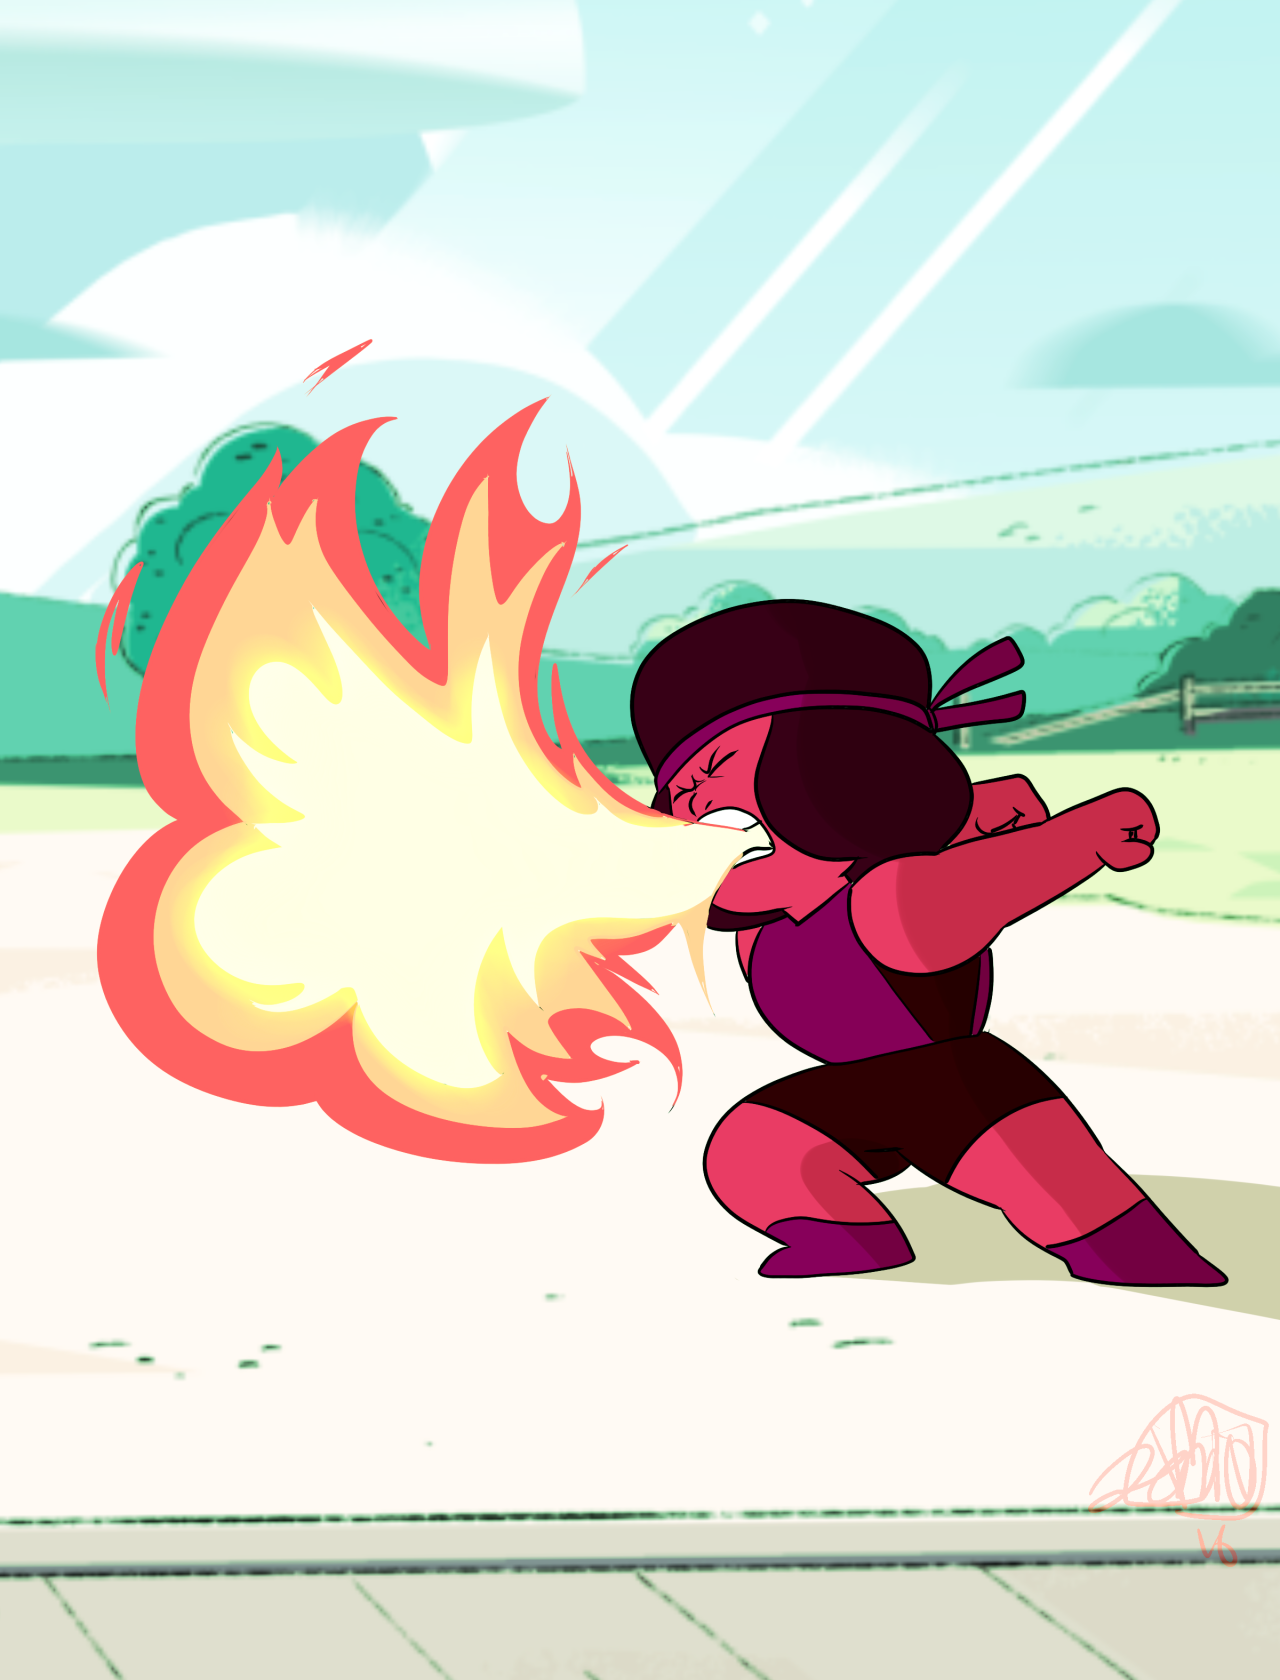 So since Alexandrite can breath FIRE, that must mean it’s Ruby’s ability? Can